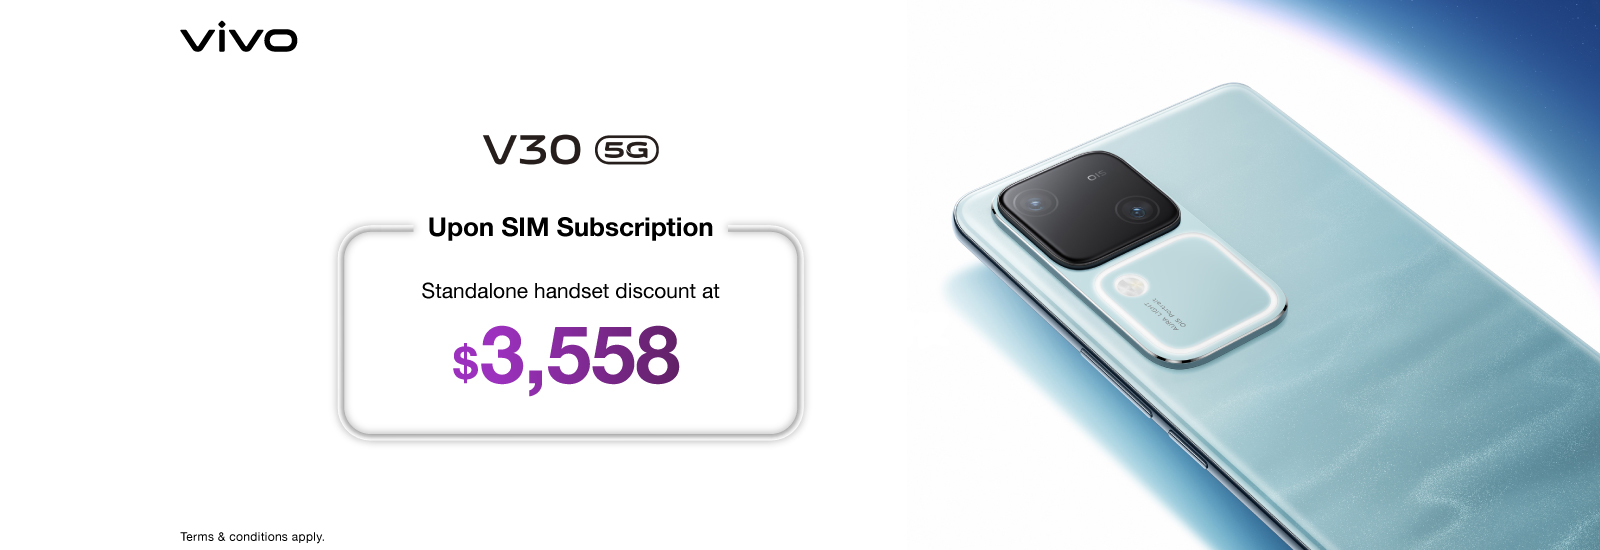 Handset special price at $3,558 upon SIM Subscription / contract renewal